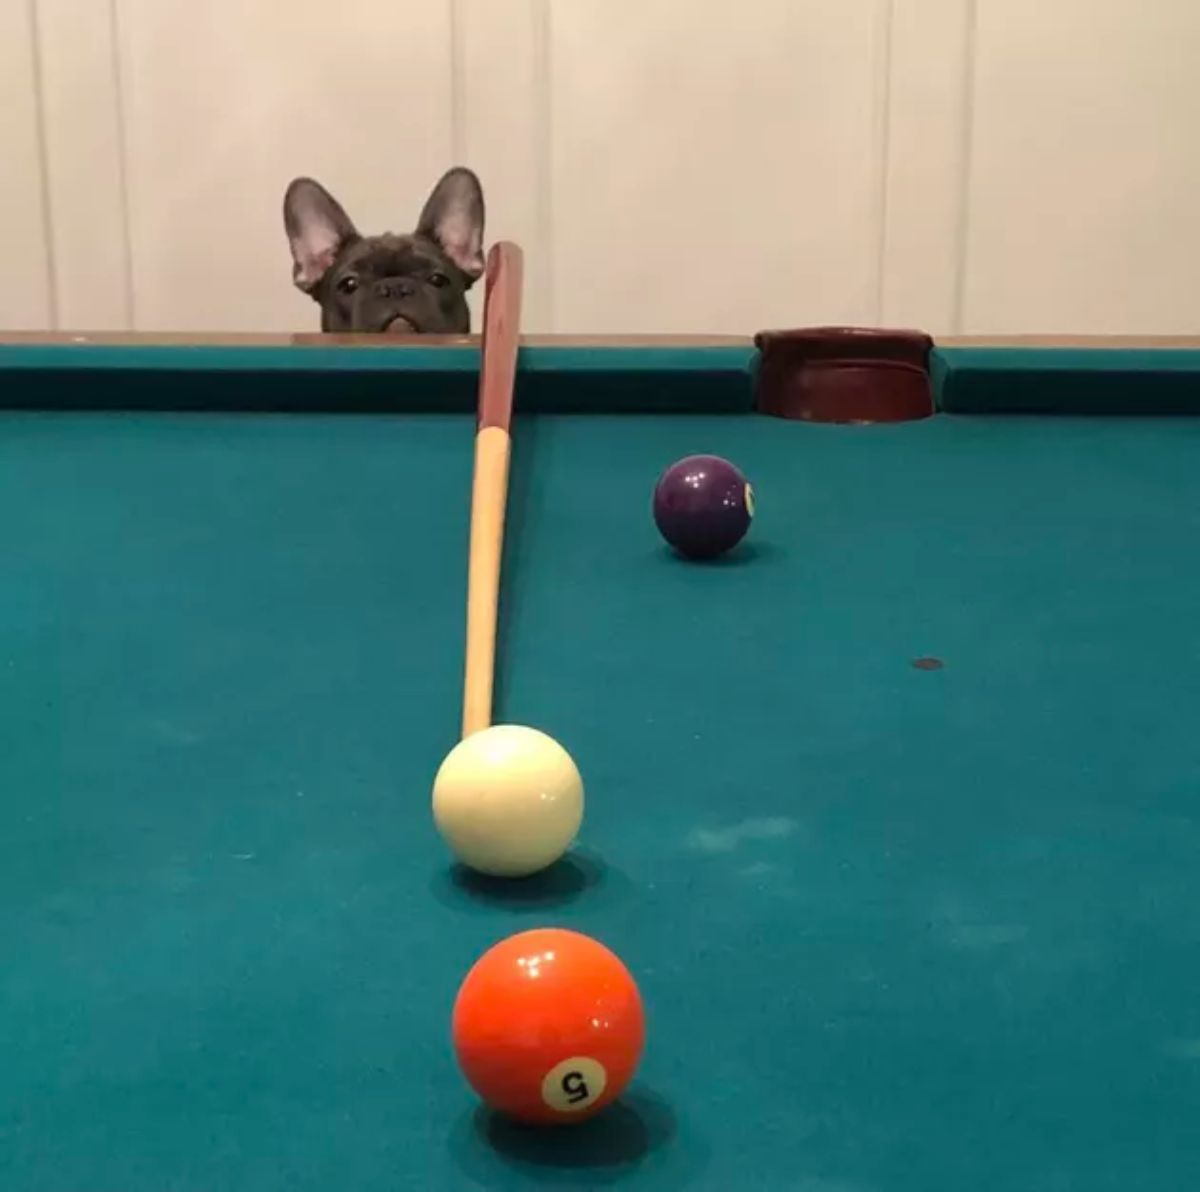 grey french bulldog peeking over the edge of a blue pool table next to a pool cue